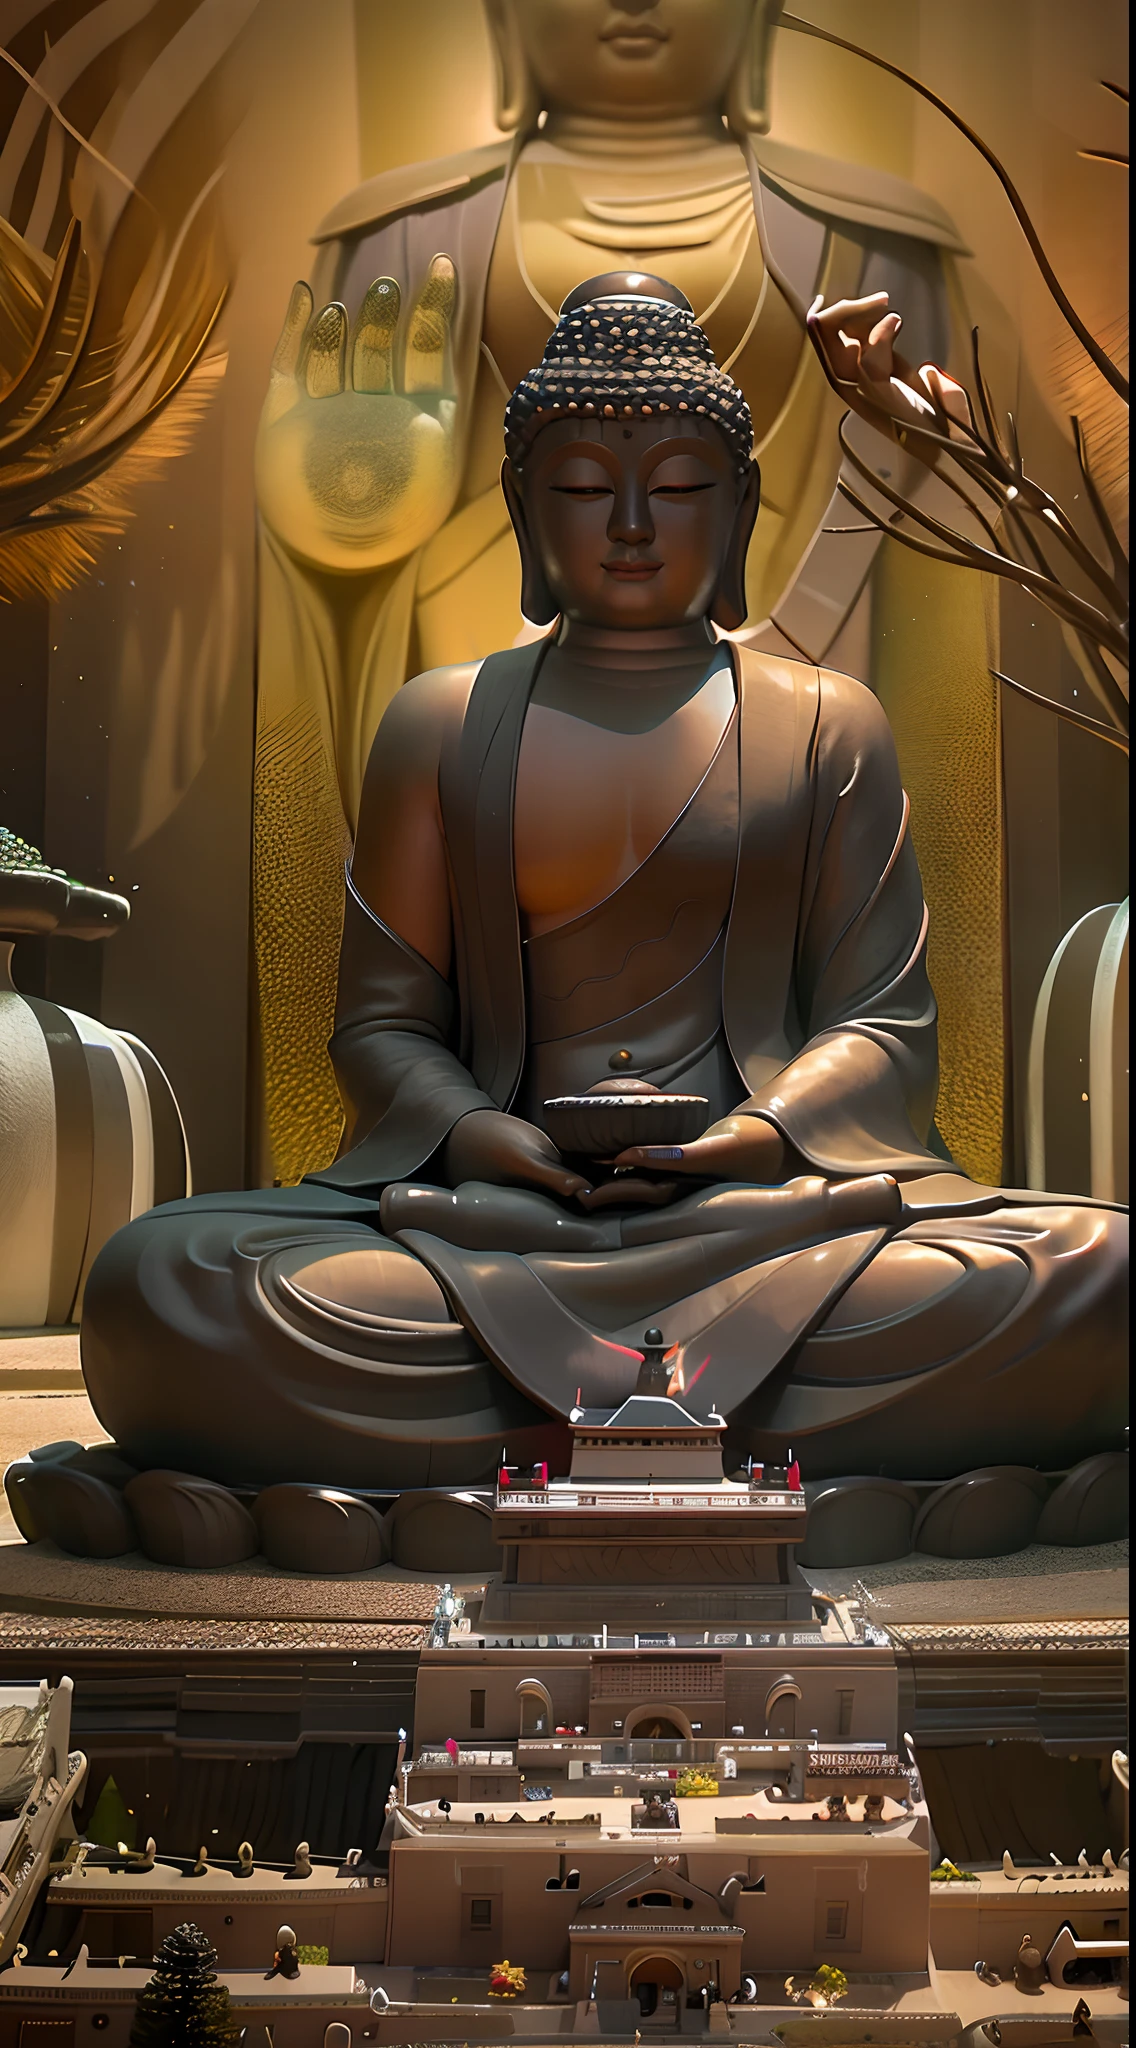 There is a Buddha statue in the pond, a Buddhist Buddha, Zen temple background, Buddhism, Buddhist, On the road to enlightenment, Zen meditation, Buddha, On the road to enlightenment, zen atmosphere, Serene expression, zen natural background, Beautiful image, powerful zen composition, 4K tranquility, zen méditation cyberpunk, a serene smile, Meditation, zen feeling